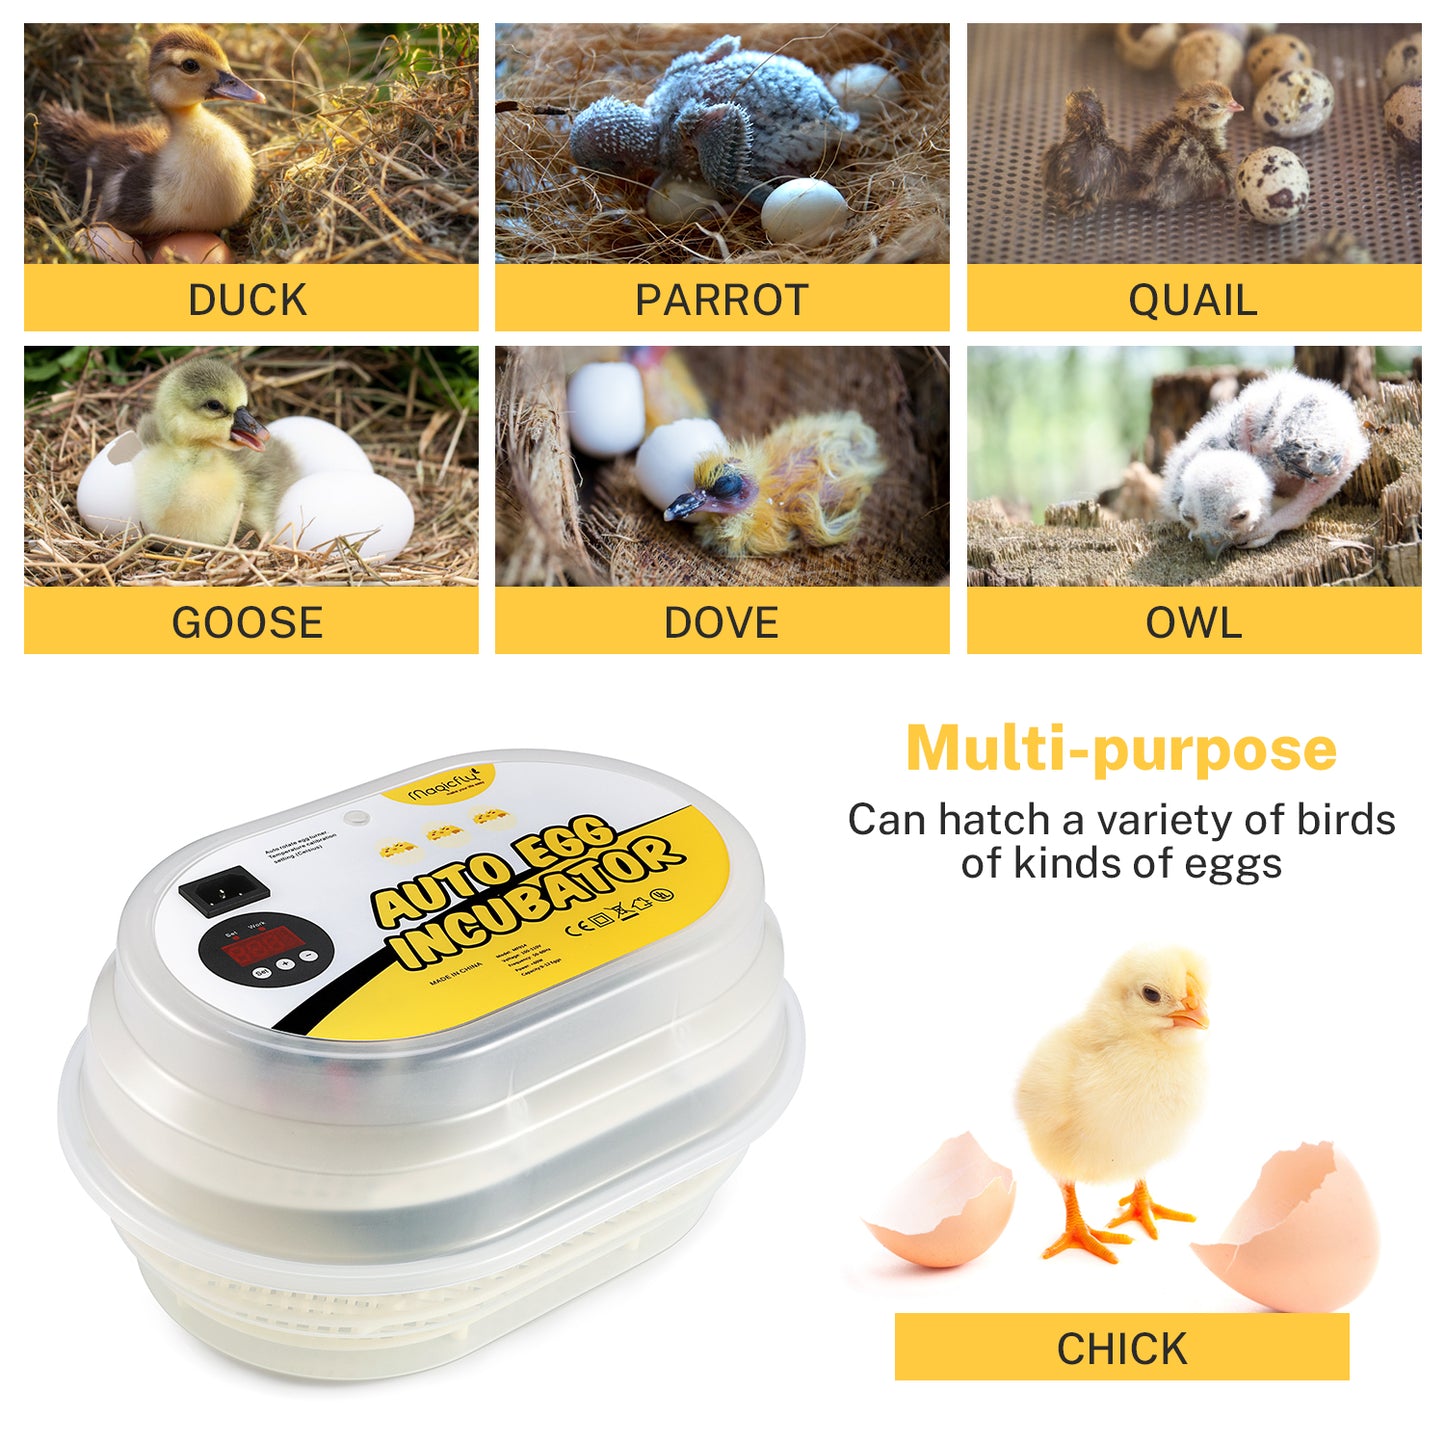 Digital Mini Fully Automatic Egg Incubator 9-12 Eggs Poultry Hatcher for Chickens Ducks Goose Birds - Magicfly